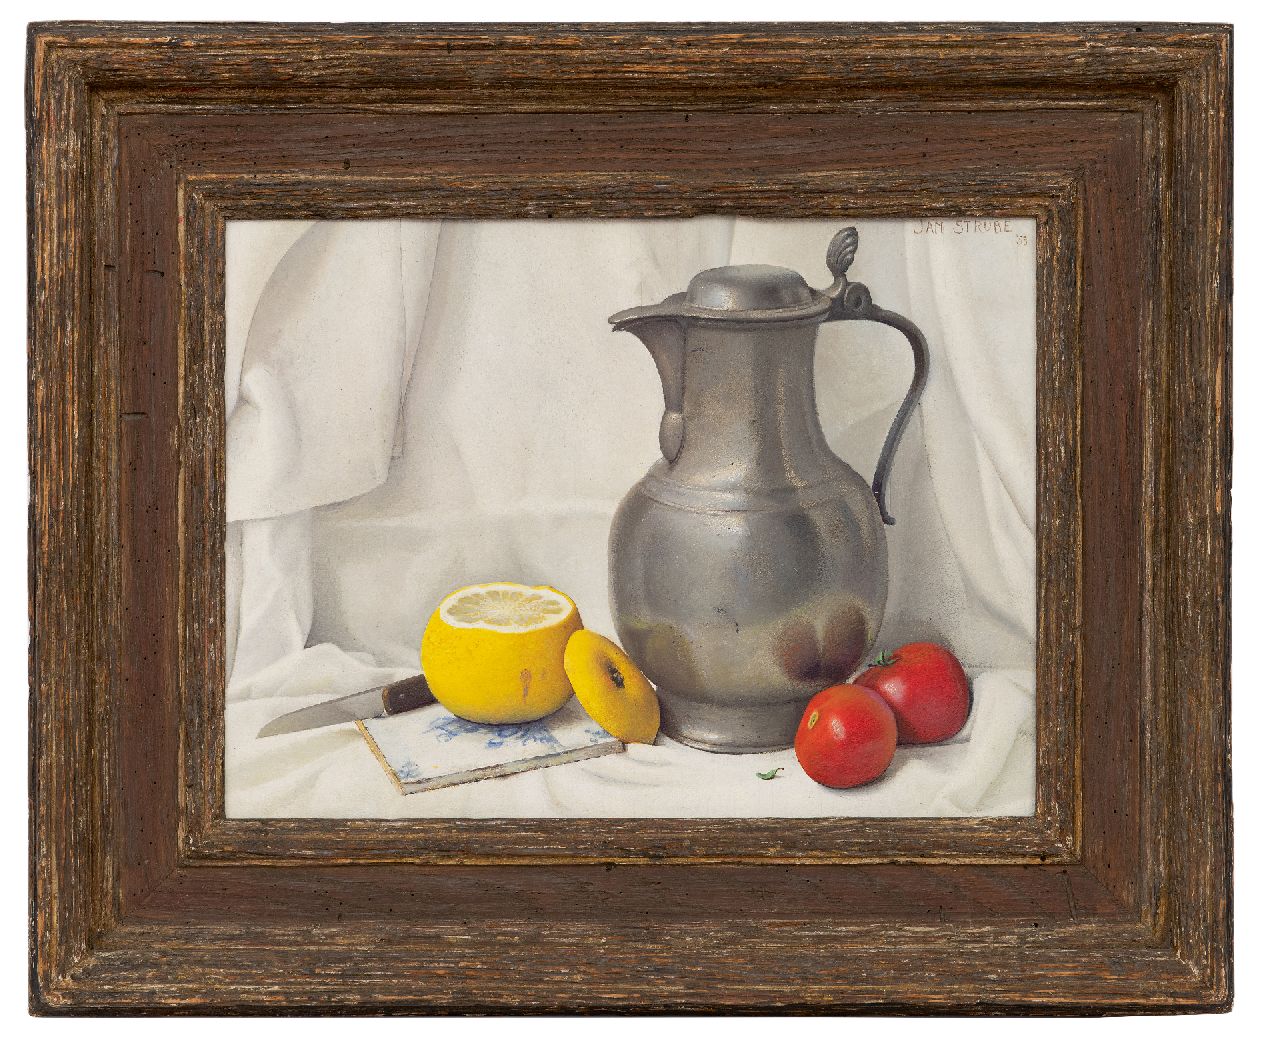 Strube J.H.  | Johan Hendrik 'Jan' Strube | Paintings offered for sale | Still life with a tin jar, a lemon and tomatoes, oil on panel 31.1 x 40.8 cm, signed u.r. and dated '53